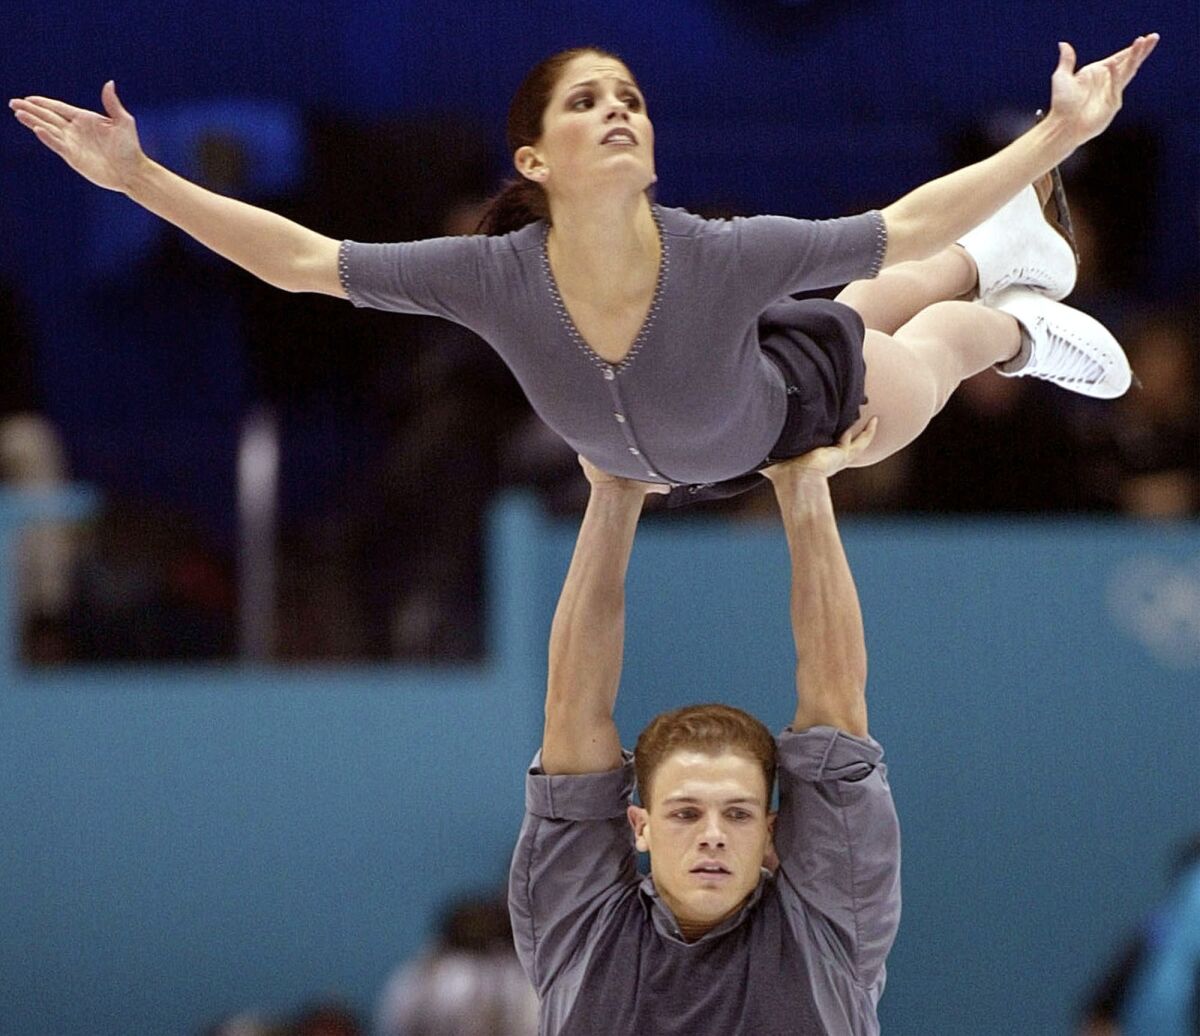 FILE - Canadian figure skaters Jamie Sale and David Pelletier compete in the pairs free program in the Winter Olympics at the Salt Lake Ice Center in Salt Lake City, Monday, Feb. 11, 2002. Tara Lipinski, the 1998 Olympic gold medalist and now an analyst for NBC, partnered with husband Todd Kapostasy on a four-part documentary series on Peacock, NBC's streaming outlet. It's called “MEDDLING” and looks deeply into the impact the judging misdeeds had on the two pairs teams involved: Canadians Jamie Sale and David Pelletier, Russians Elena Berezhnaya and Anton Sikharulidze.(AP Photo/Lionel Cironneau, File)